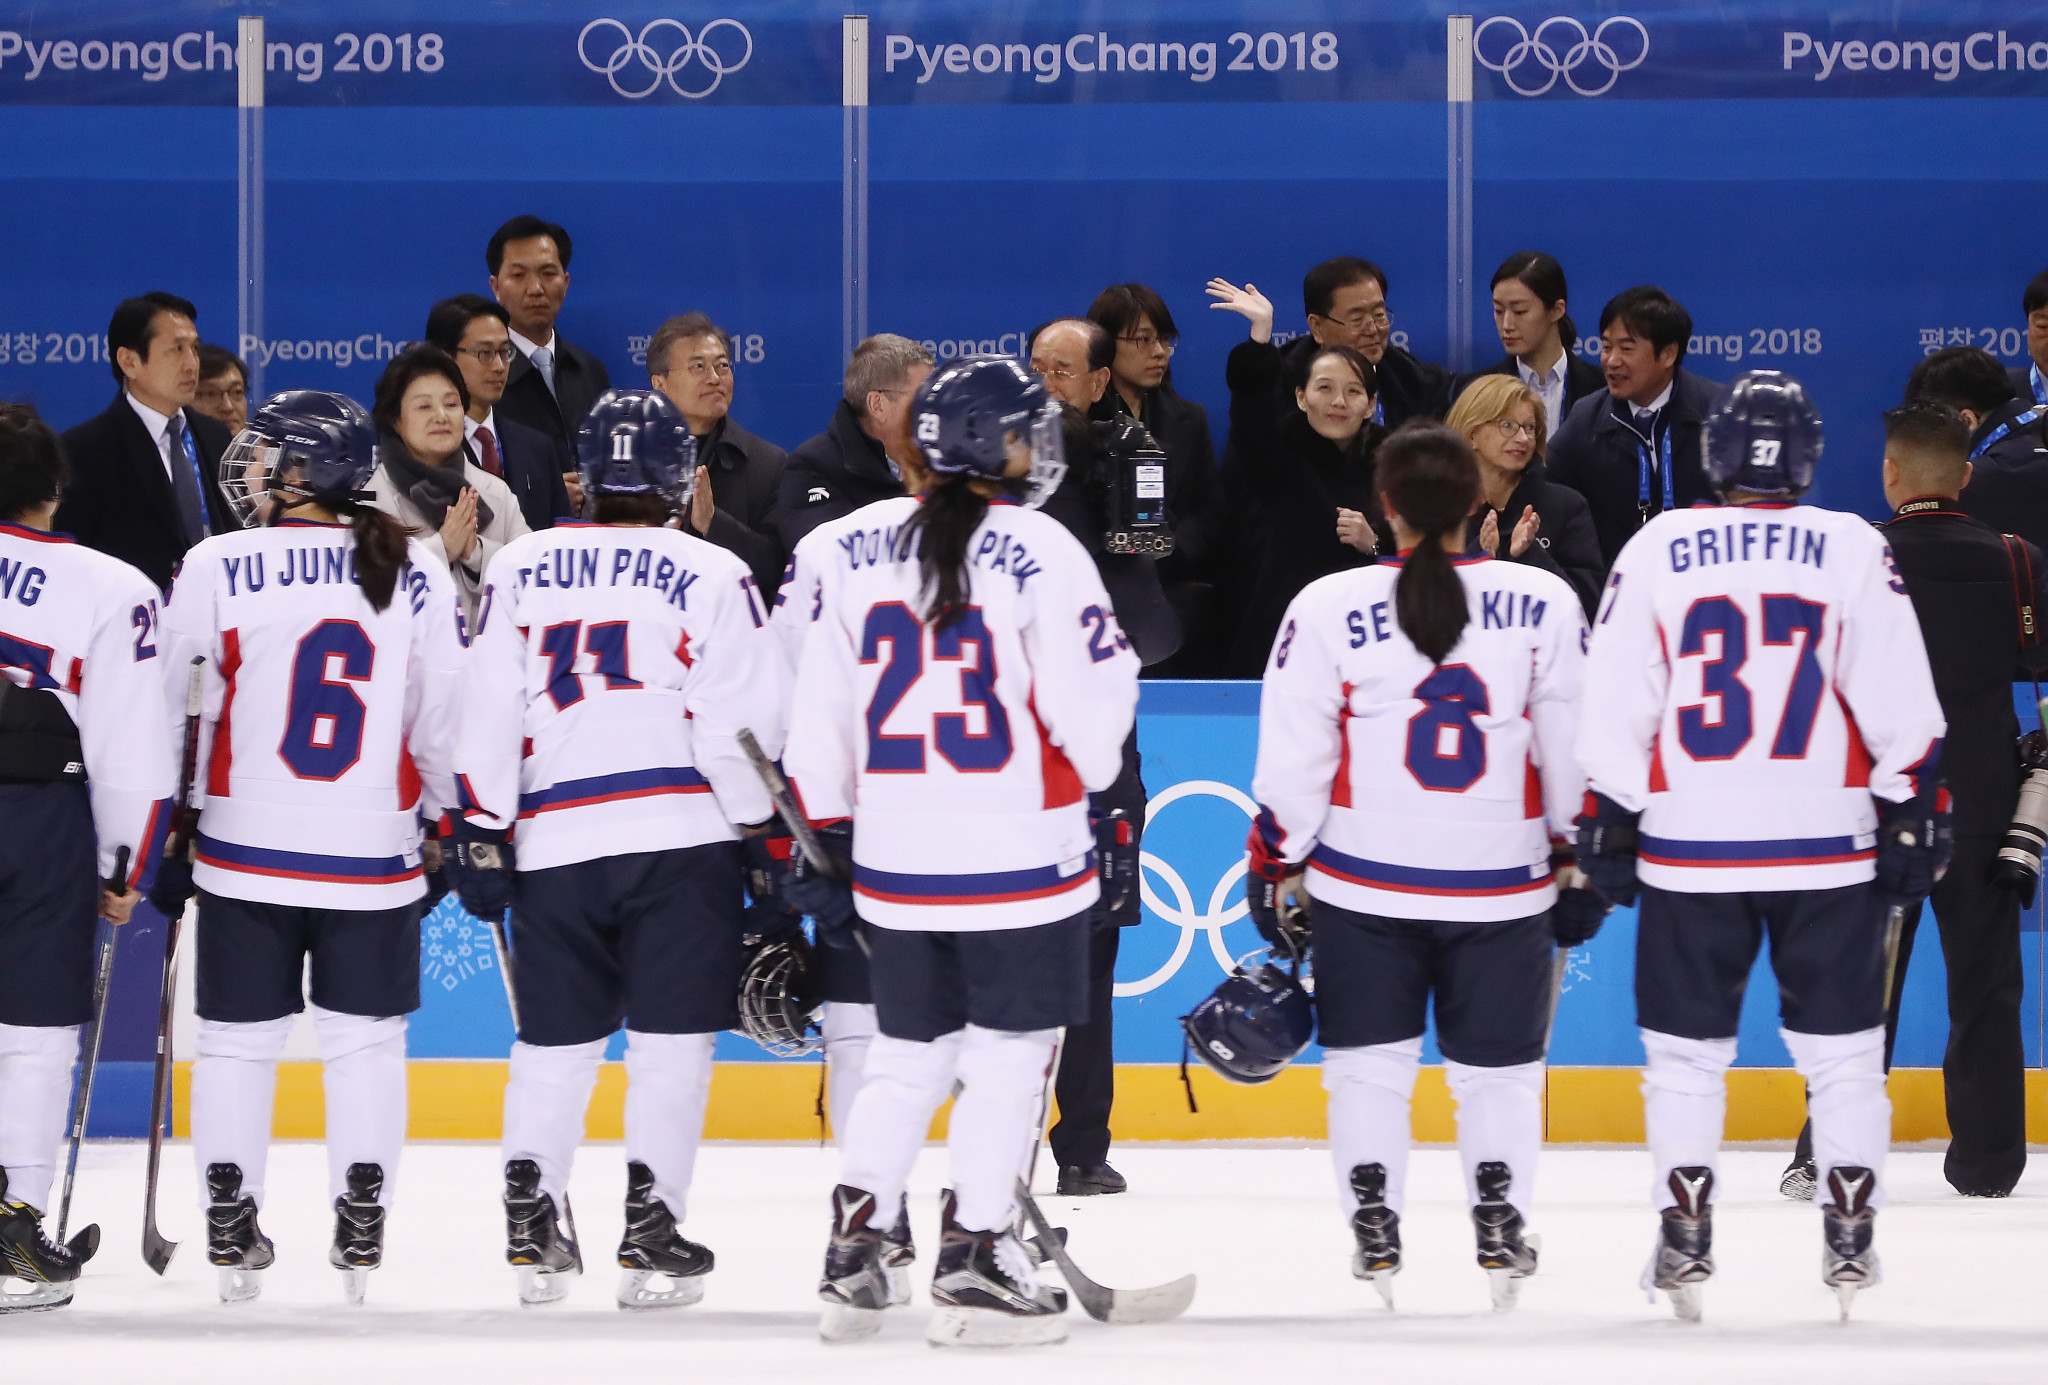 The unified women's ice hockey team made their historic debut against Switzerland ©Getty Images